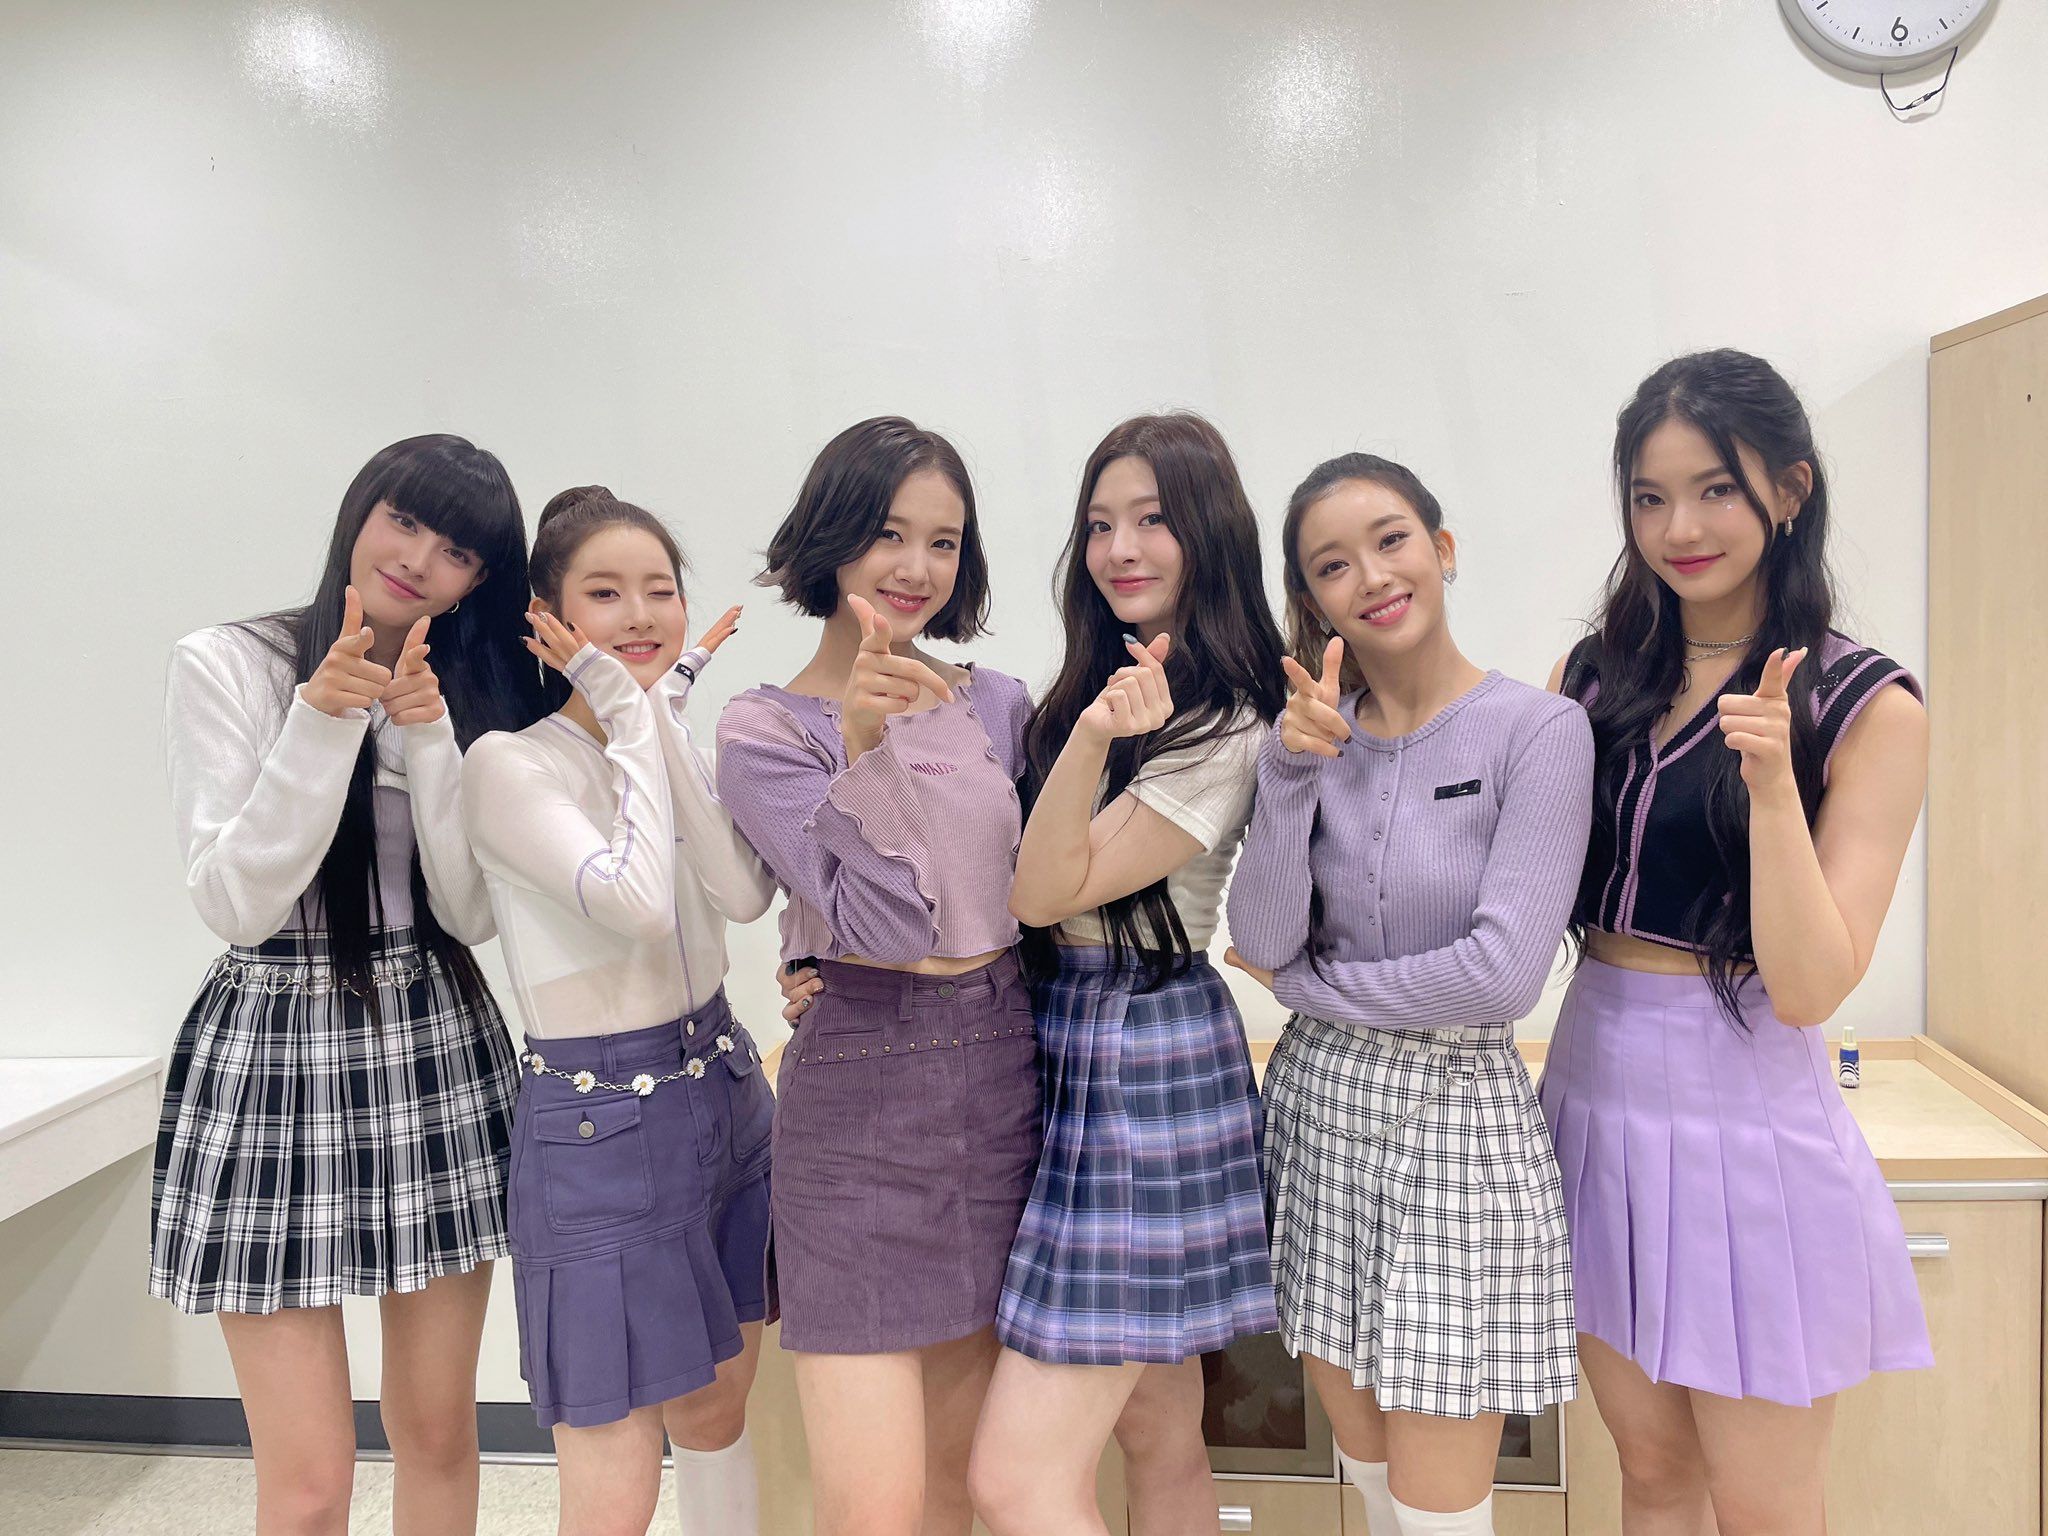 STAYC Takes Over As The Female Rookie Group Debuted In 2020 With Highest First Week Album Sales. Kpopmap, Kdrama and Trend Stories Coverage